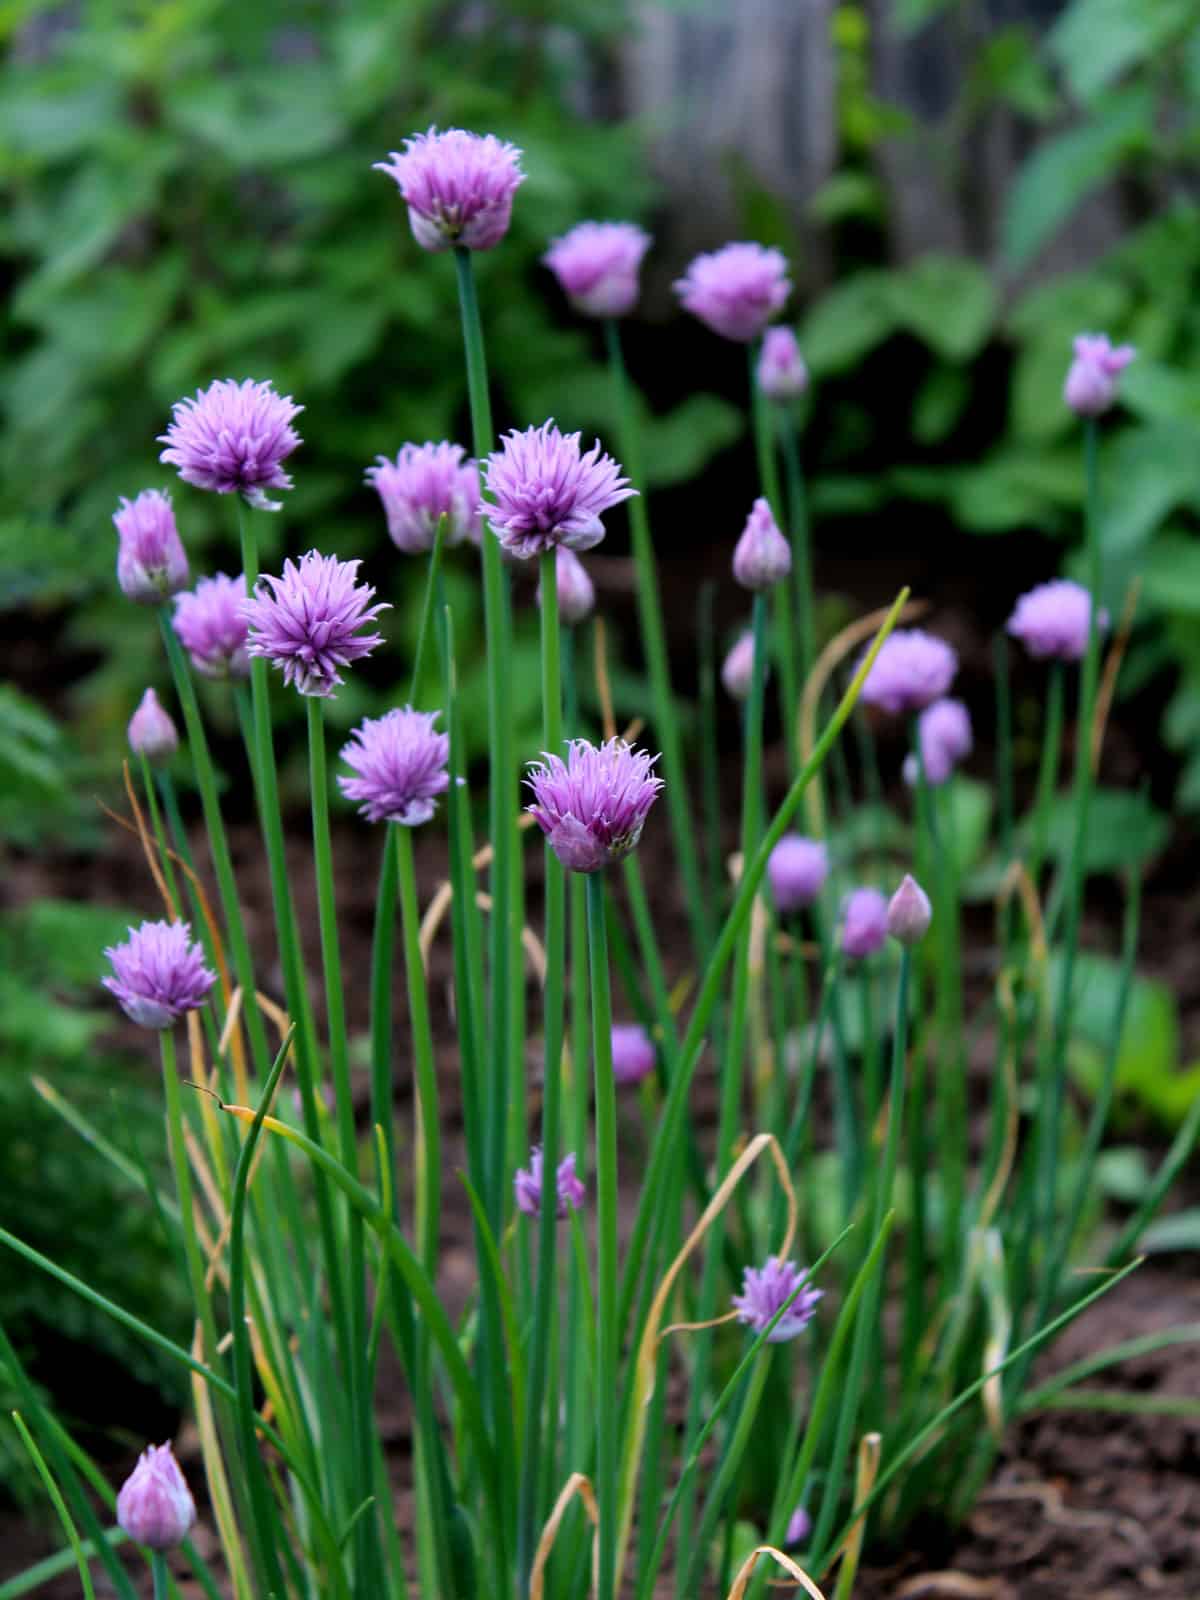 Bright flowering purple bulbs of a Chives herb